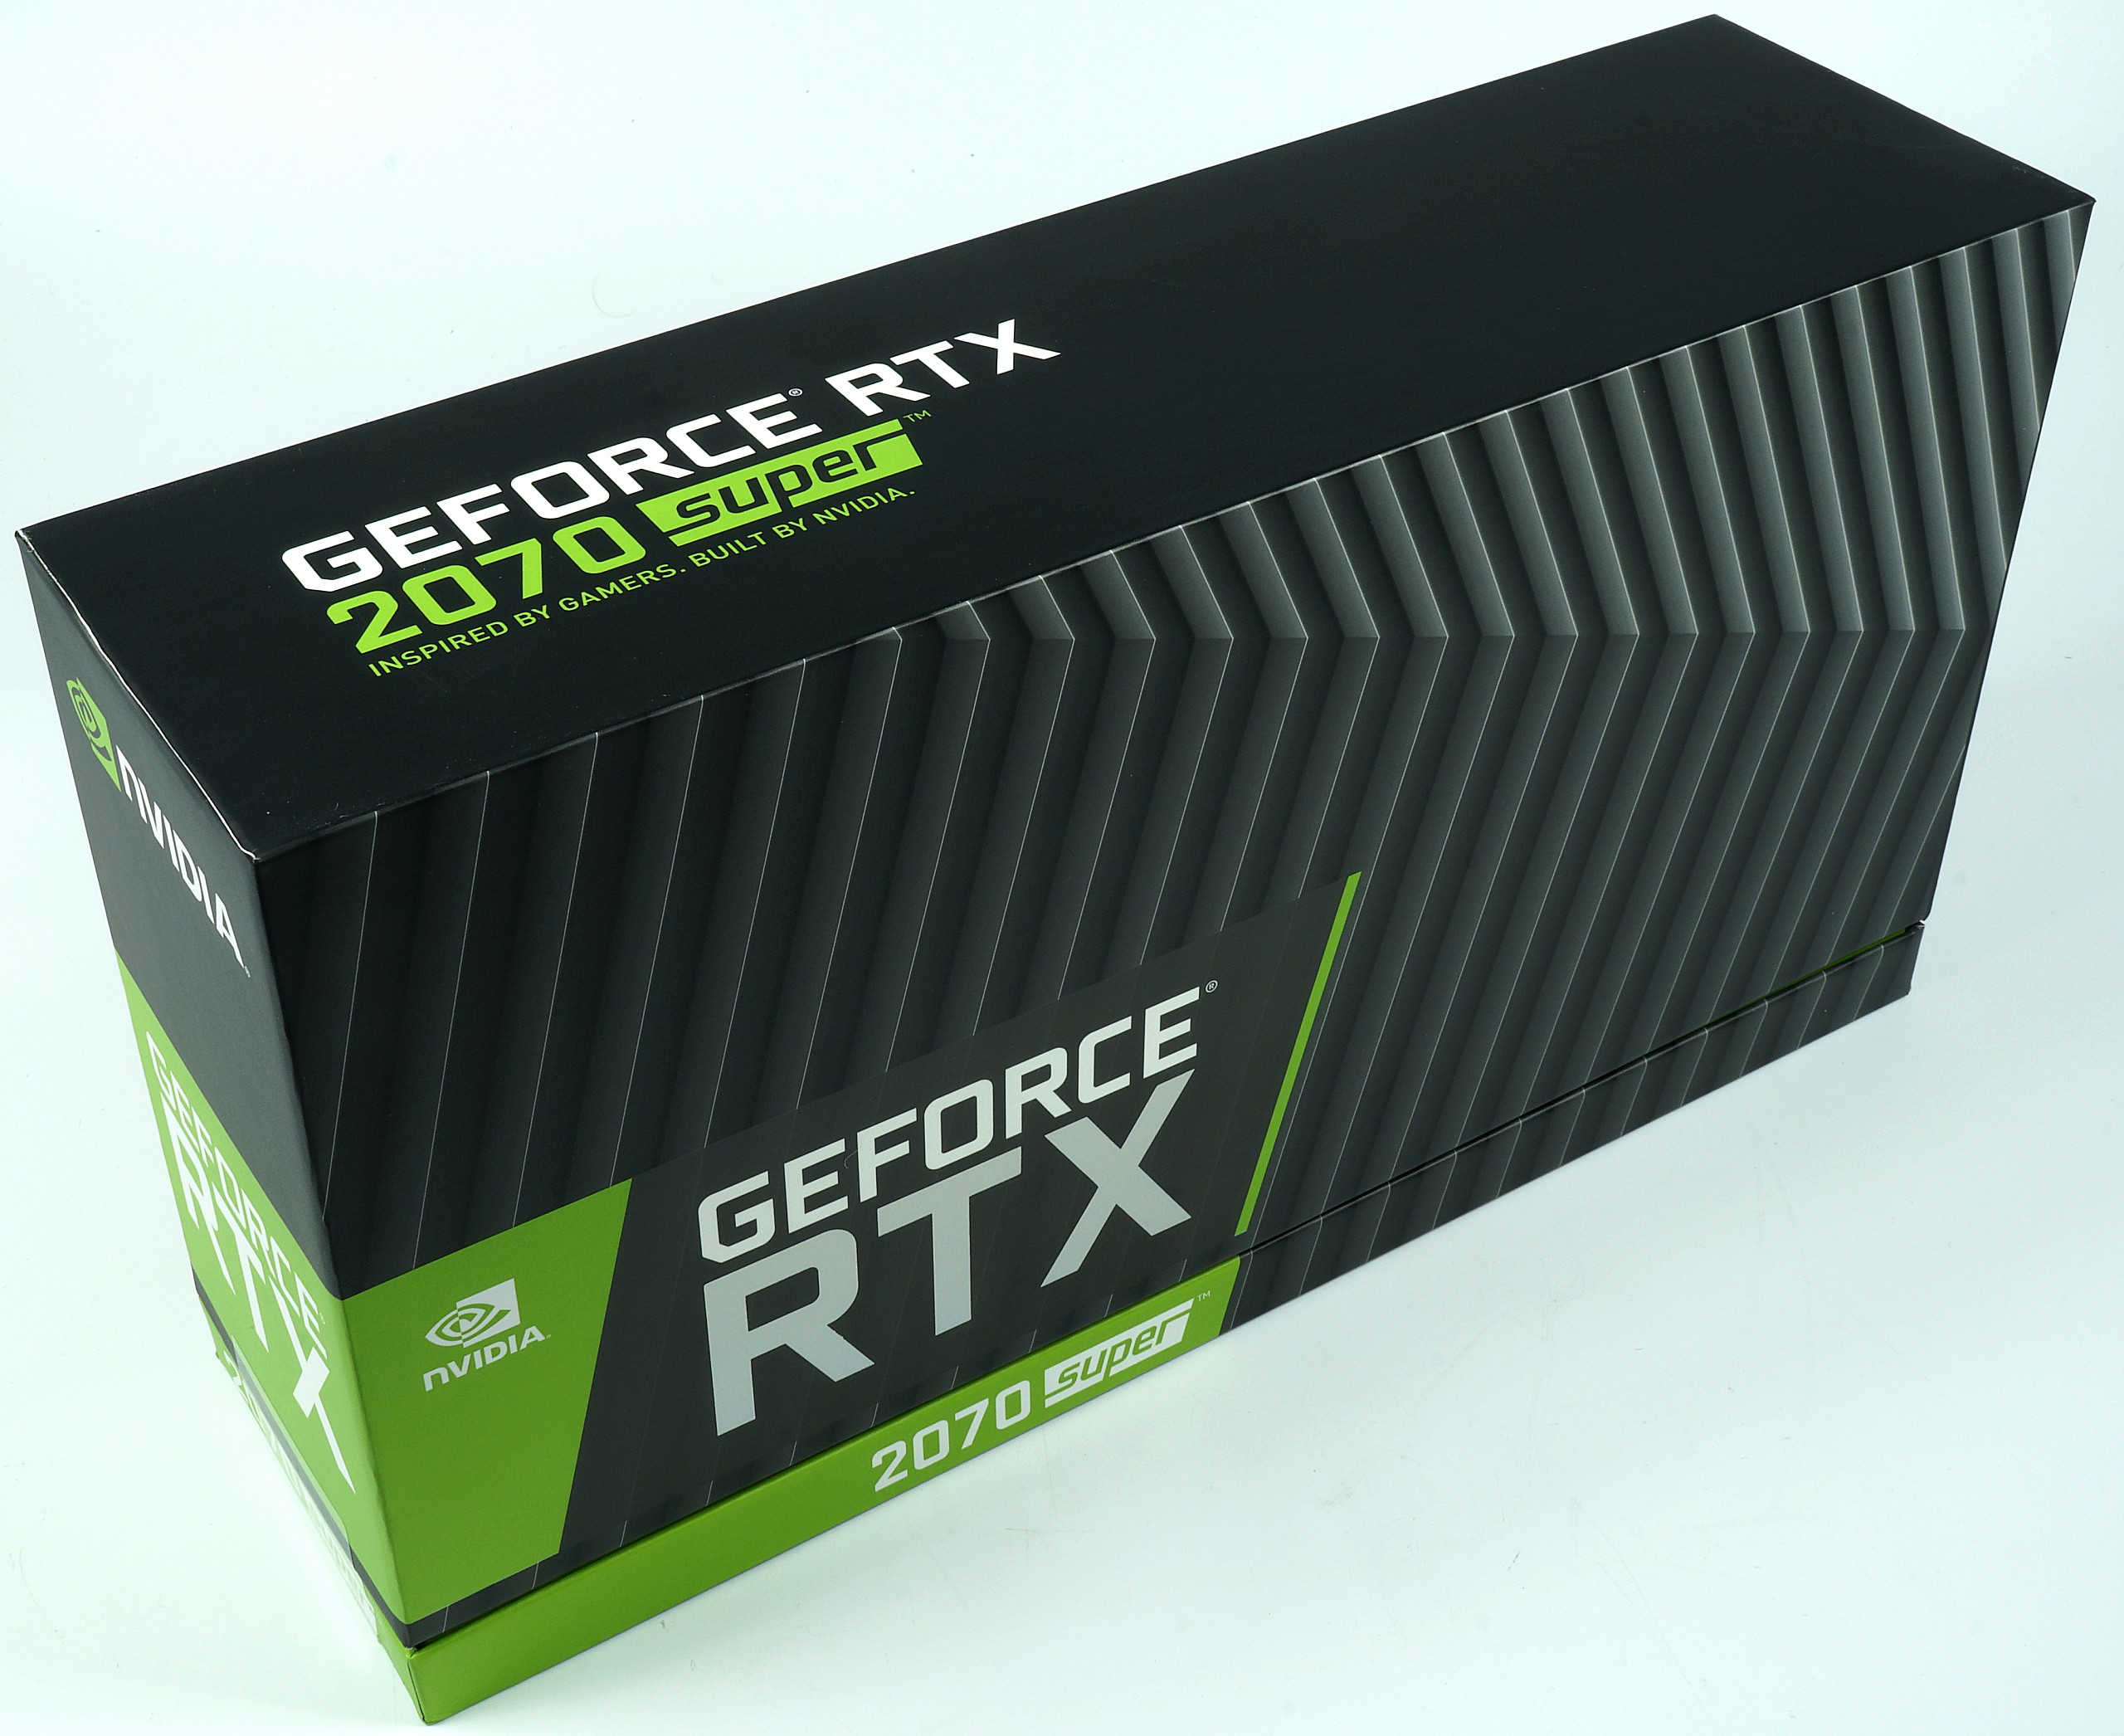 Nvidia GeForce RTX 2070 Super in review - the more reasonable RTX